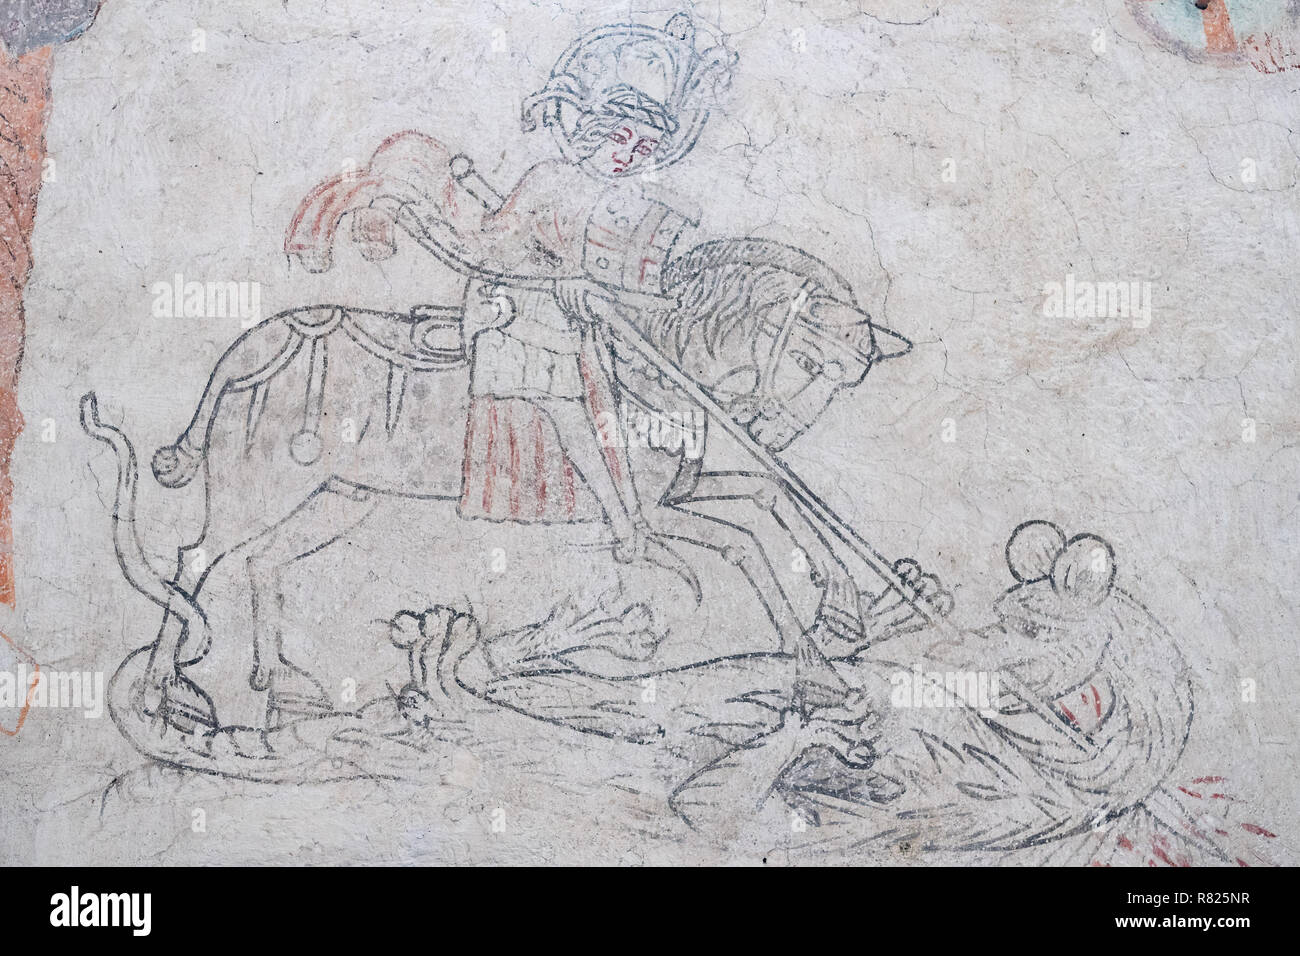 St. George with the Dragon, medieval mural painting, church of Hejdeby, diocese of Visby, island of Gotland, Sweden Stock Photo